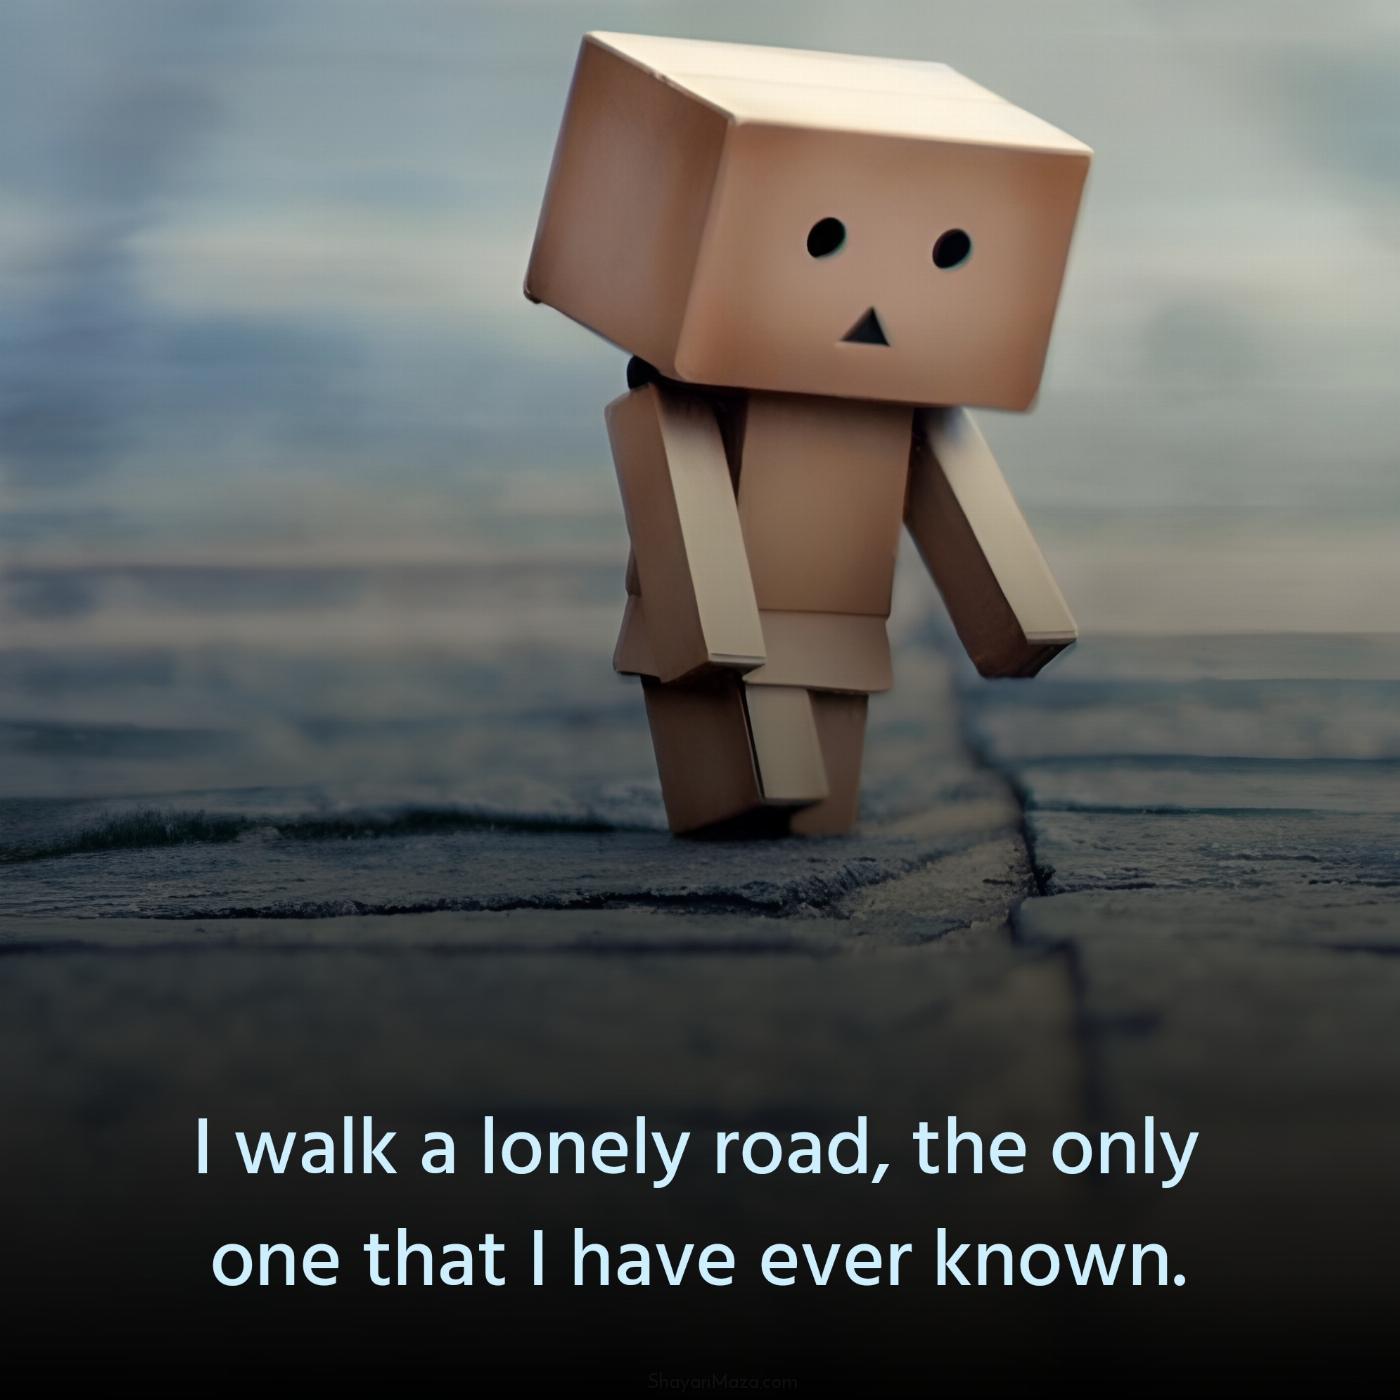 I walk a lonely road the only one that I have ever known